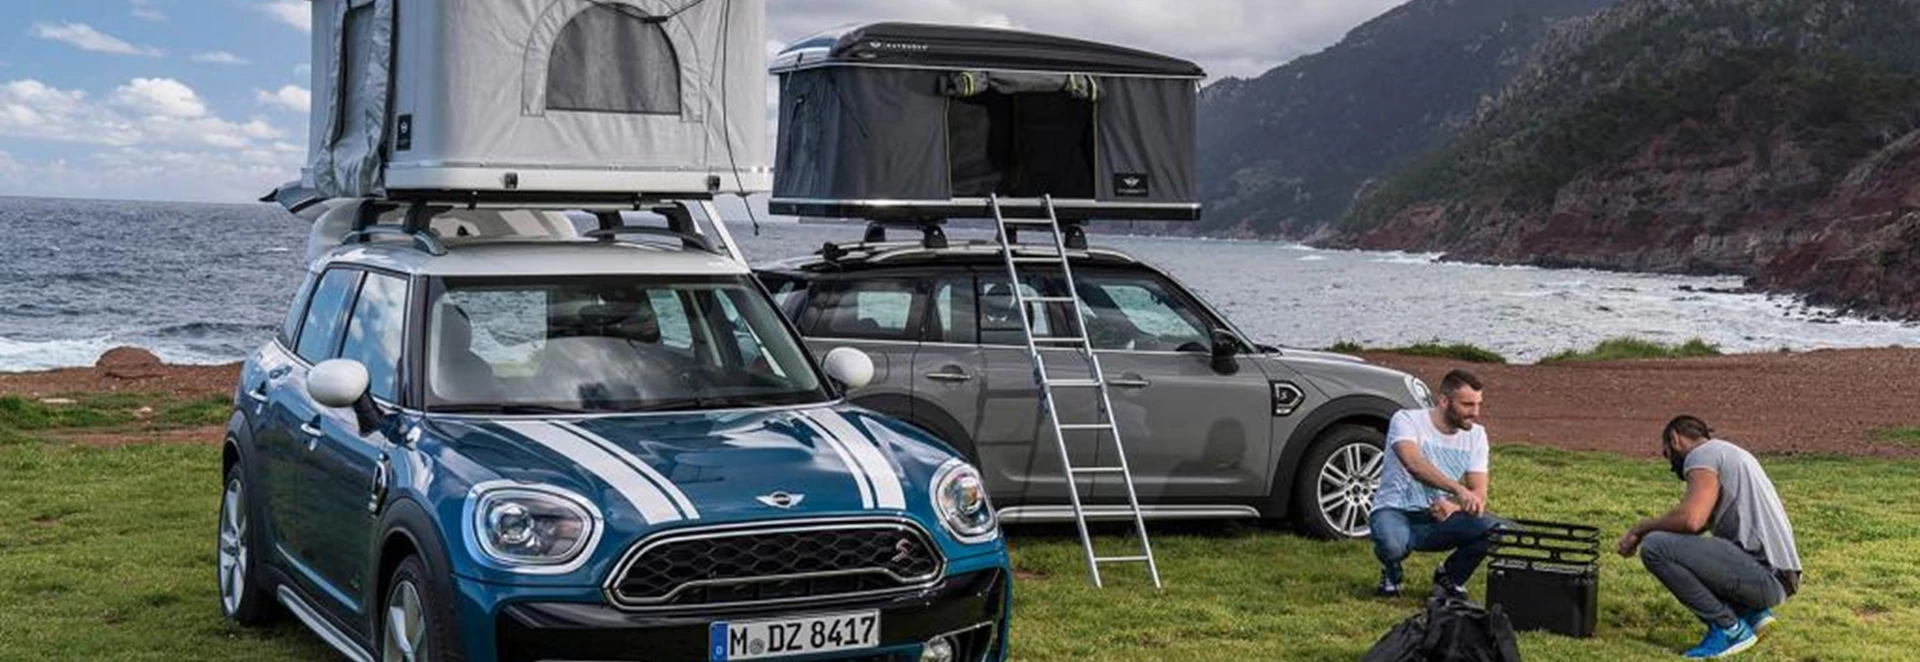 Turn your MINI into a campervan with this incredibly nifty folding roof tent